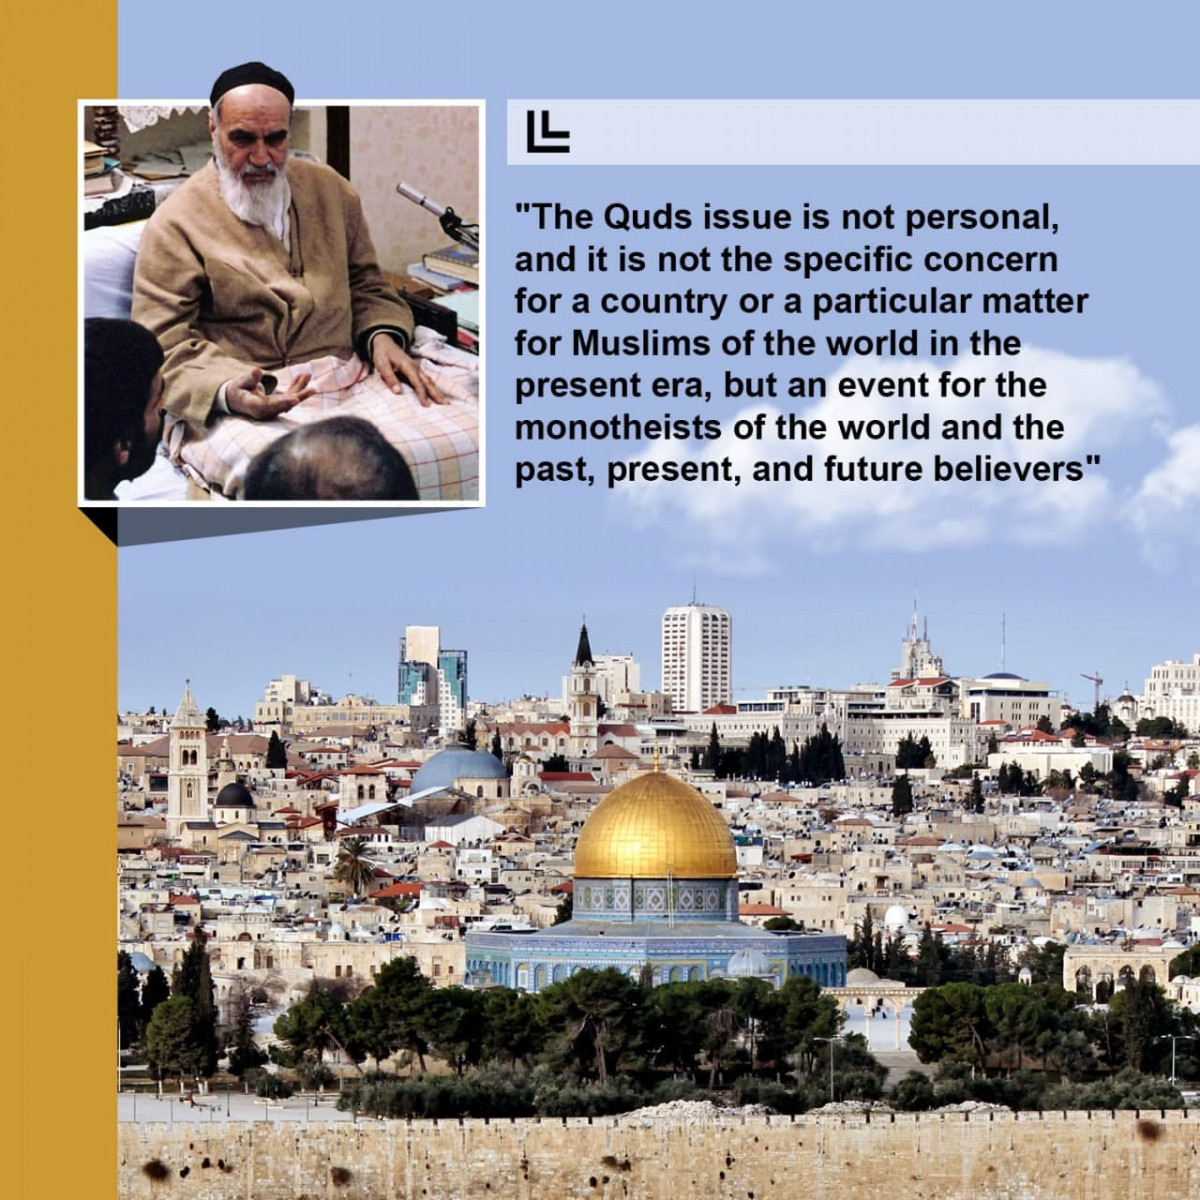 The Quds issue is not personal